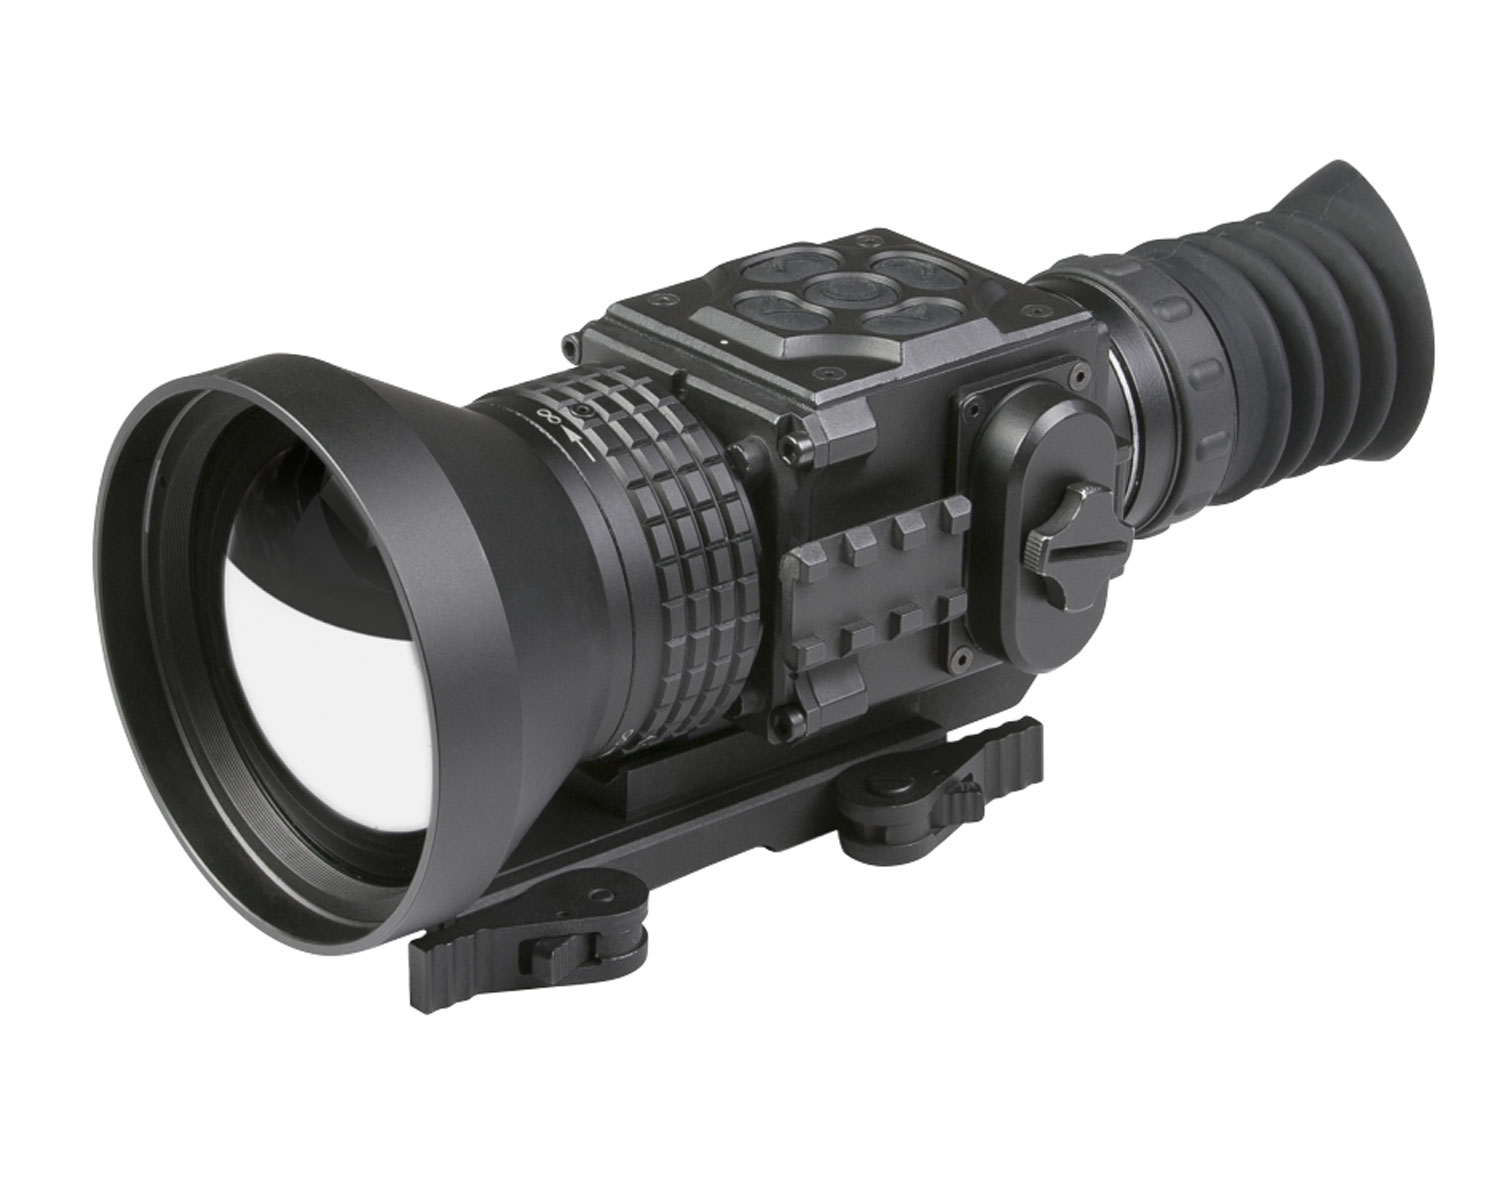 AGM Global Vision 3083455008SE71 Secutor T75-384 Thermal Rifle Scope Black 3.6x 75mm Multi Reticle 384x288, 50Hz Resolution Zoom Digital 1x/2x/4x/PIP Features Rangefinder